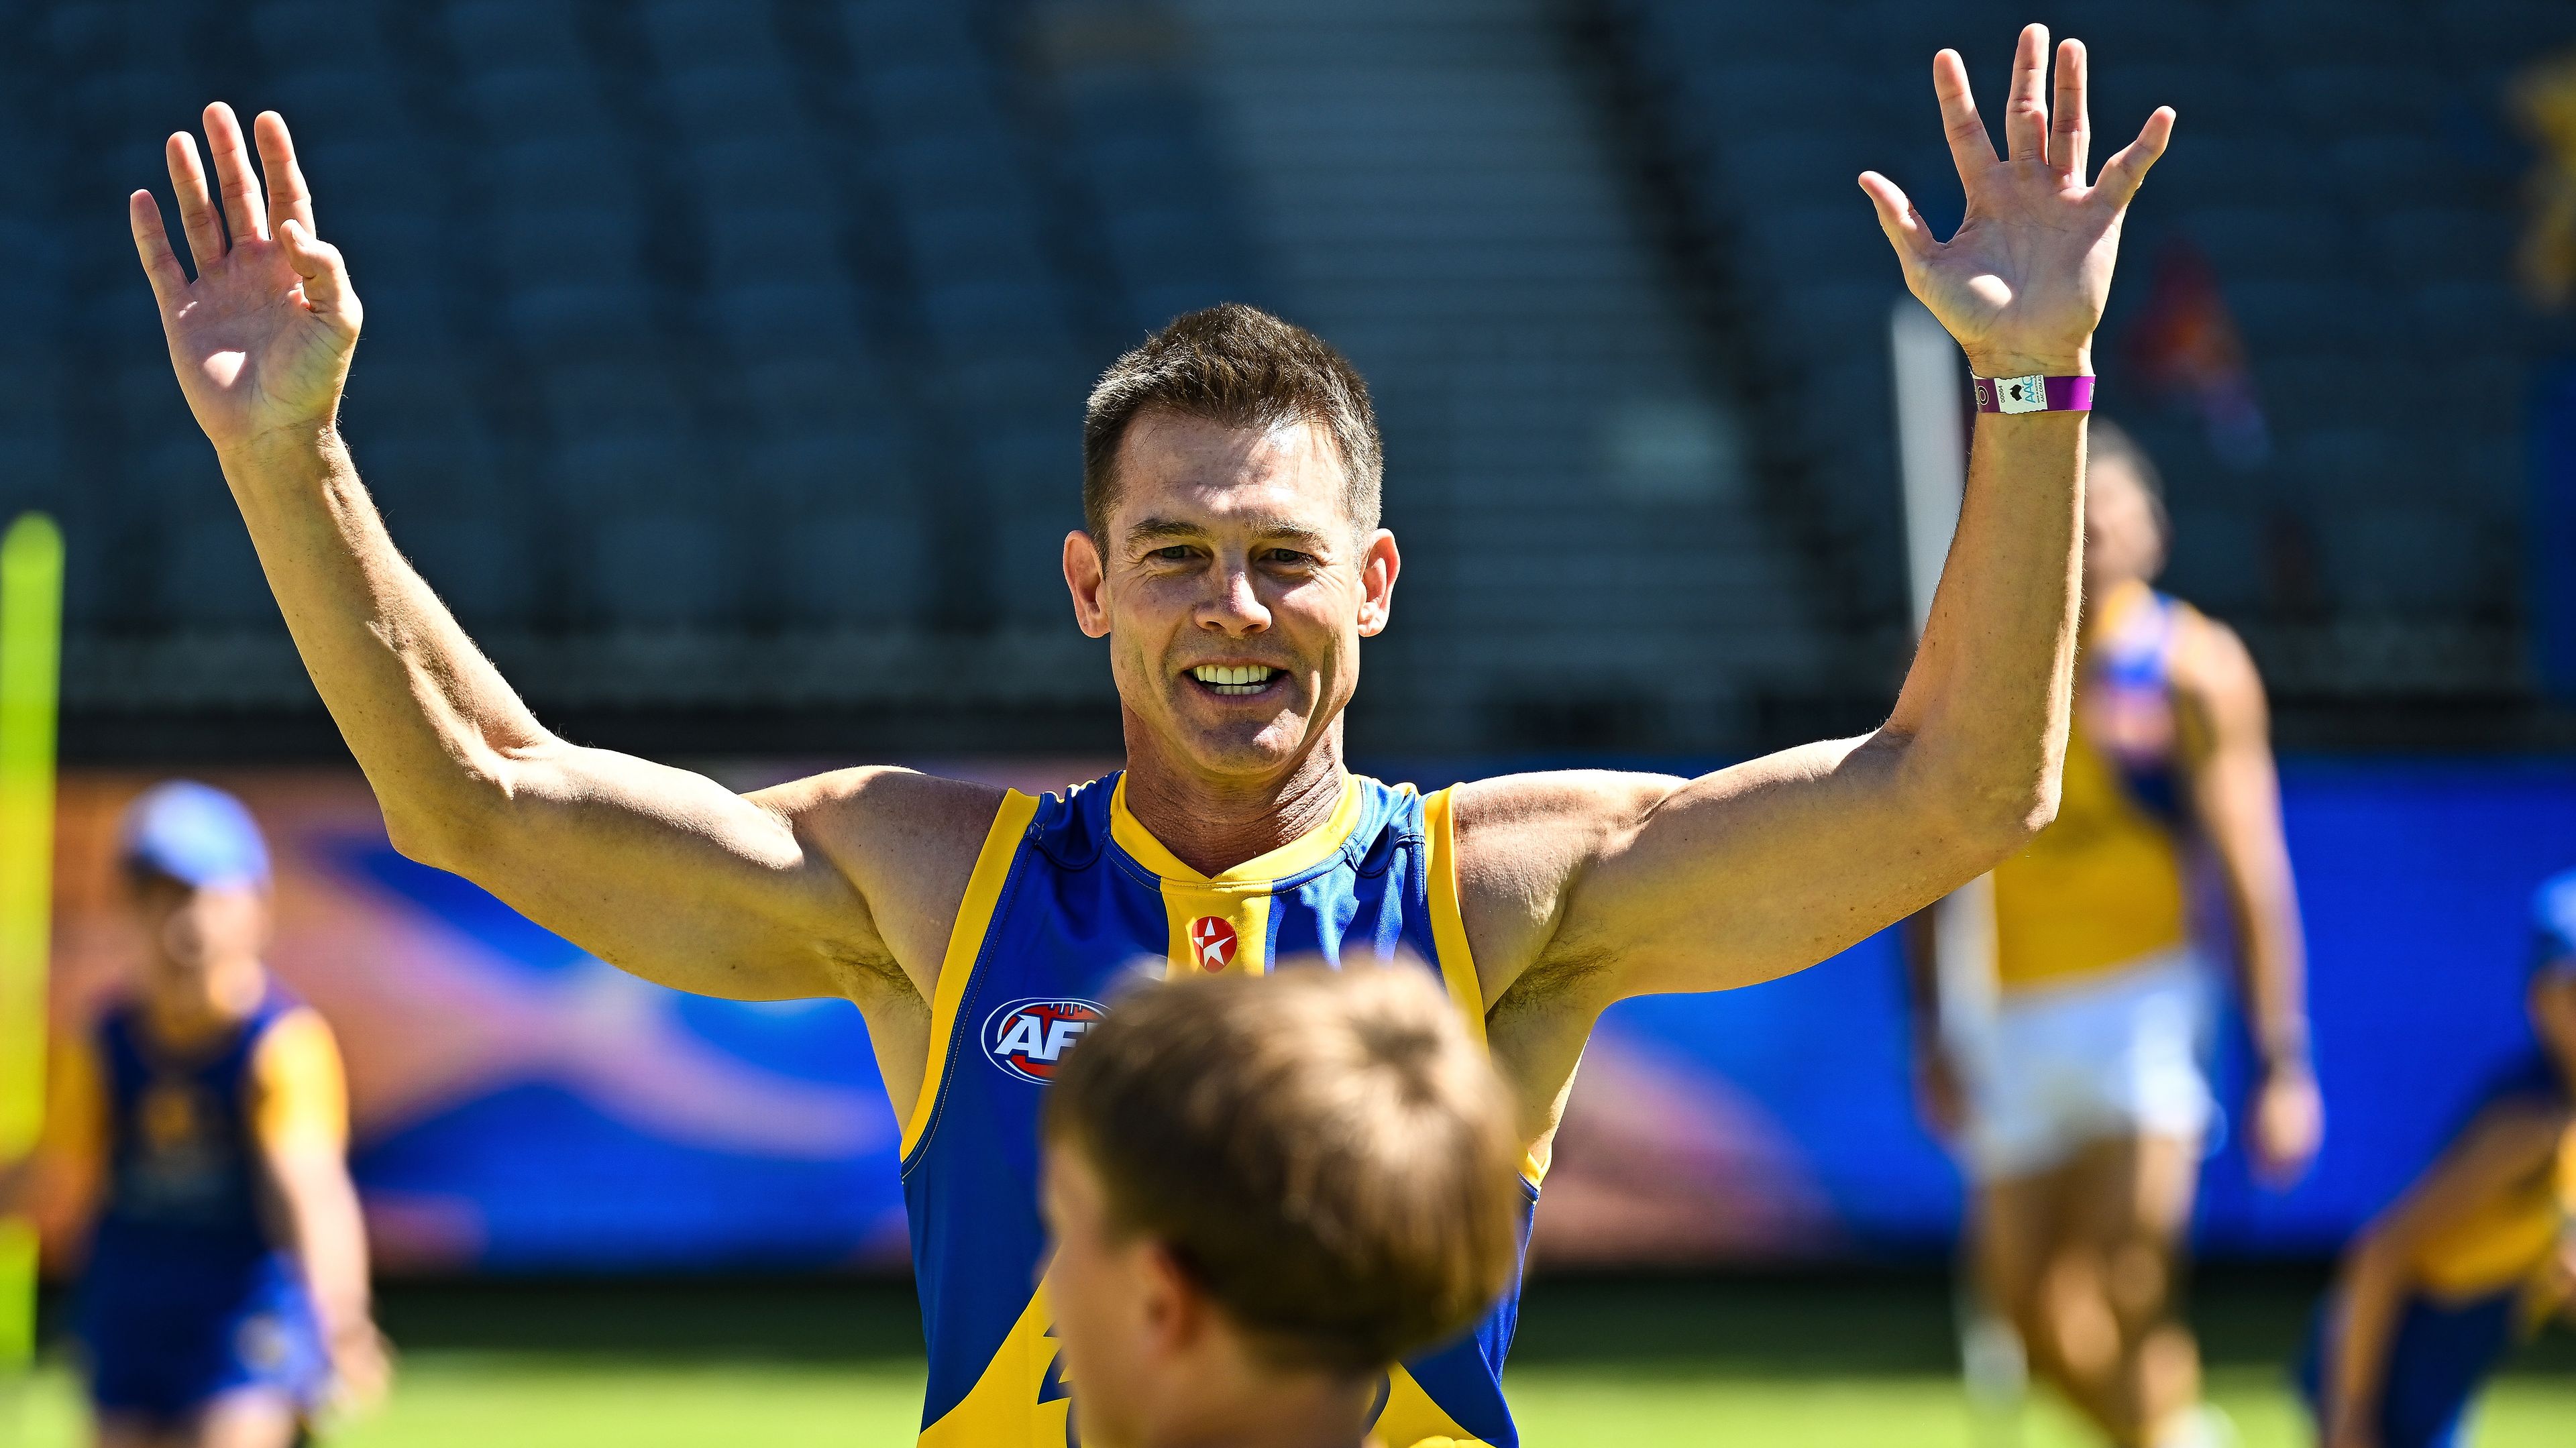 Ben Cousins was part of the Eagles family day at the start of the season.